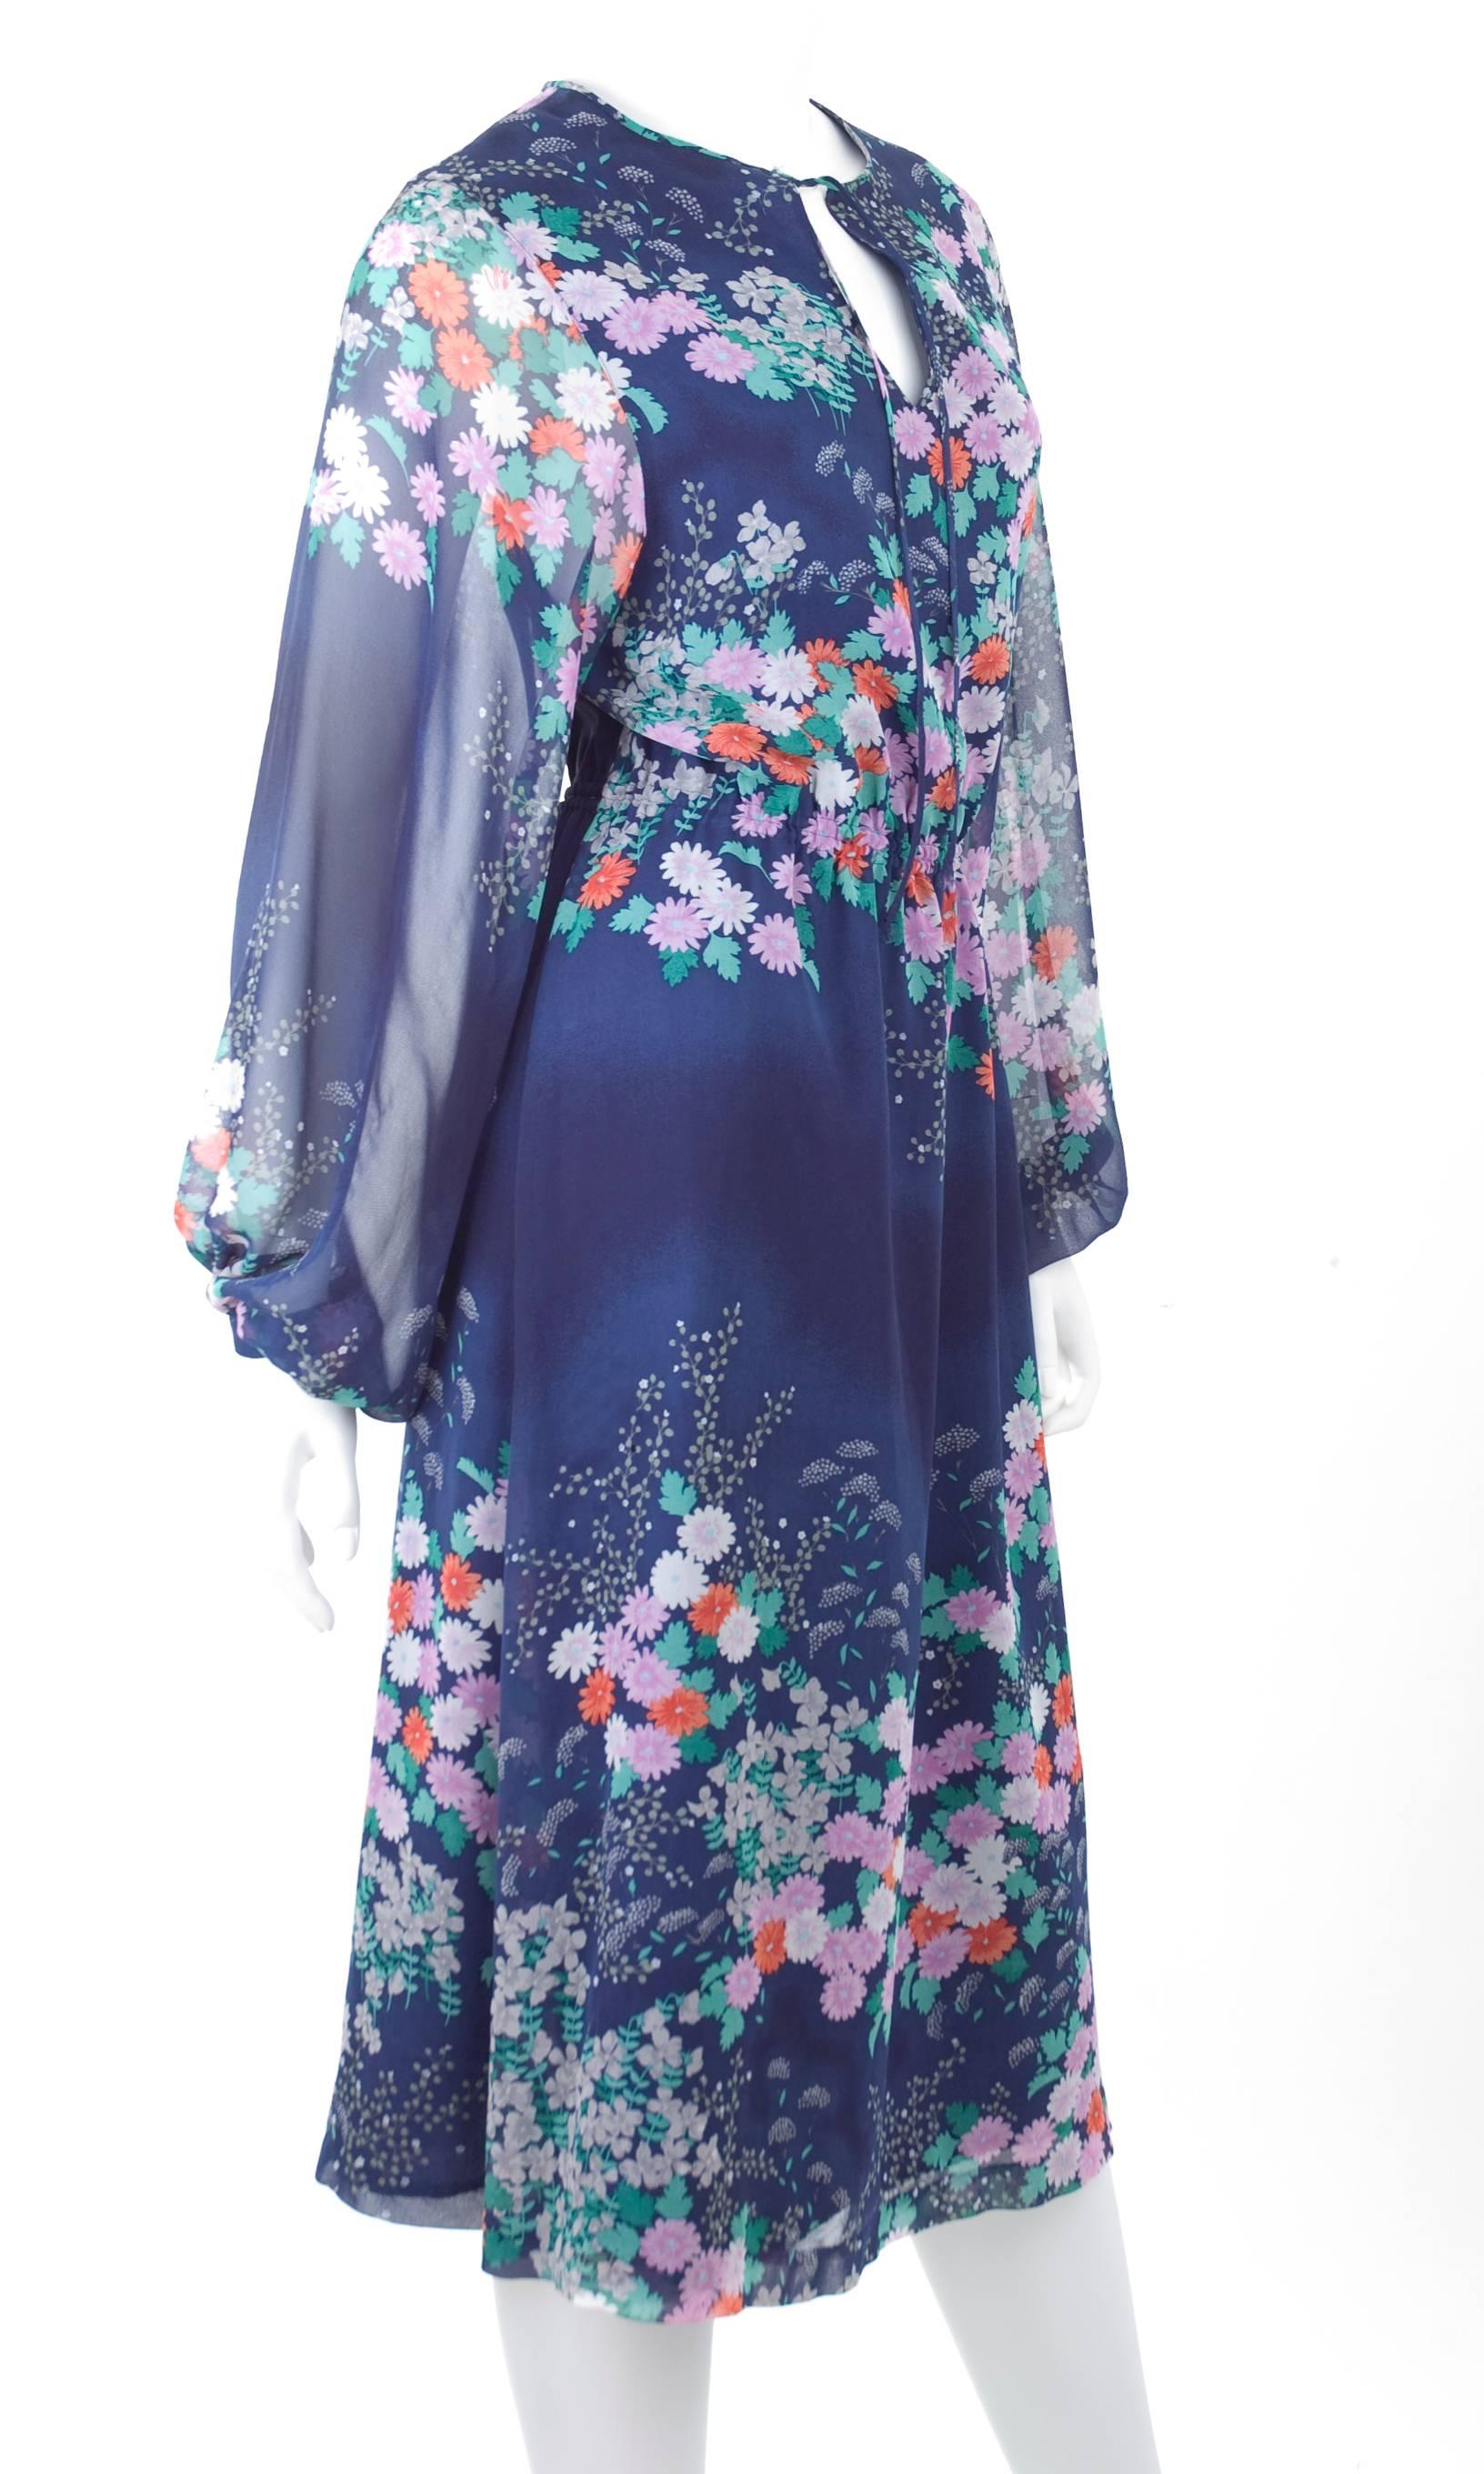 Wonderful 1970's Chiffon Dress. Flowers on blue background and an elastic waistline.
Excellent condition - no flaws to mention.
Made in Japan.
No size label - should be 6 US
Measurements:
Length 44